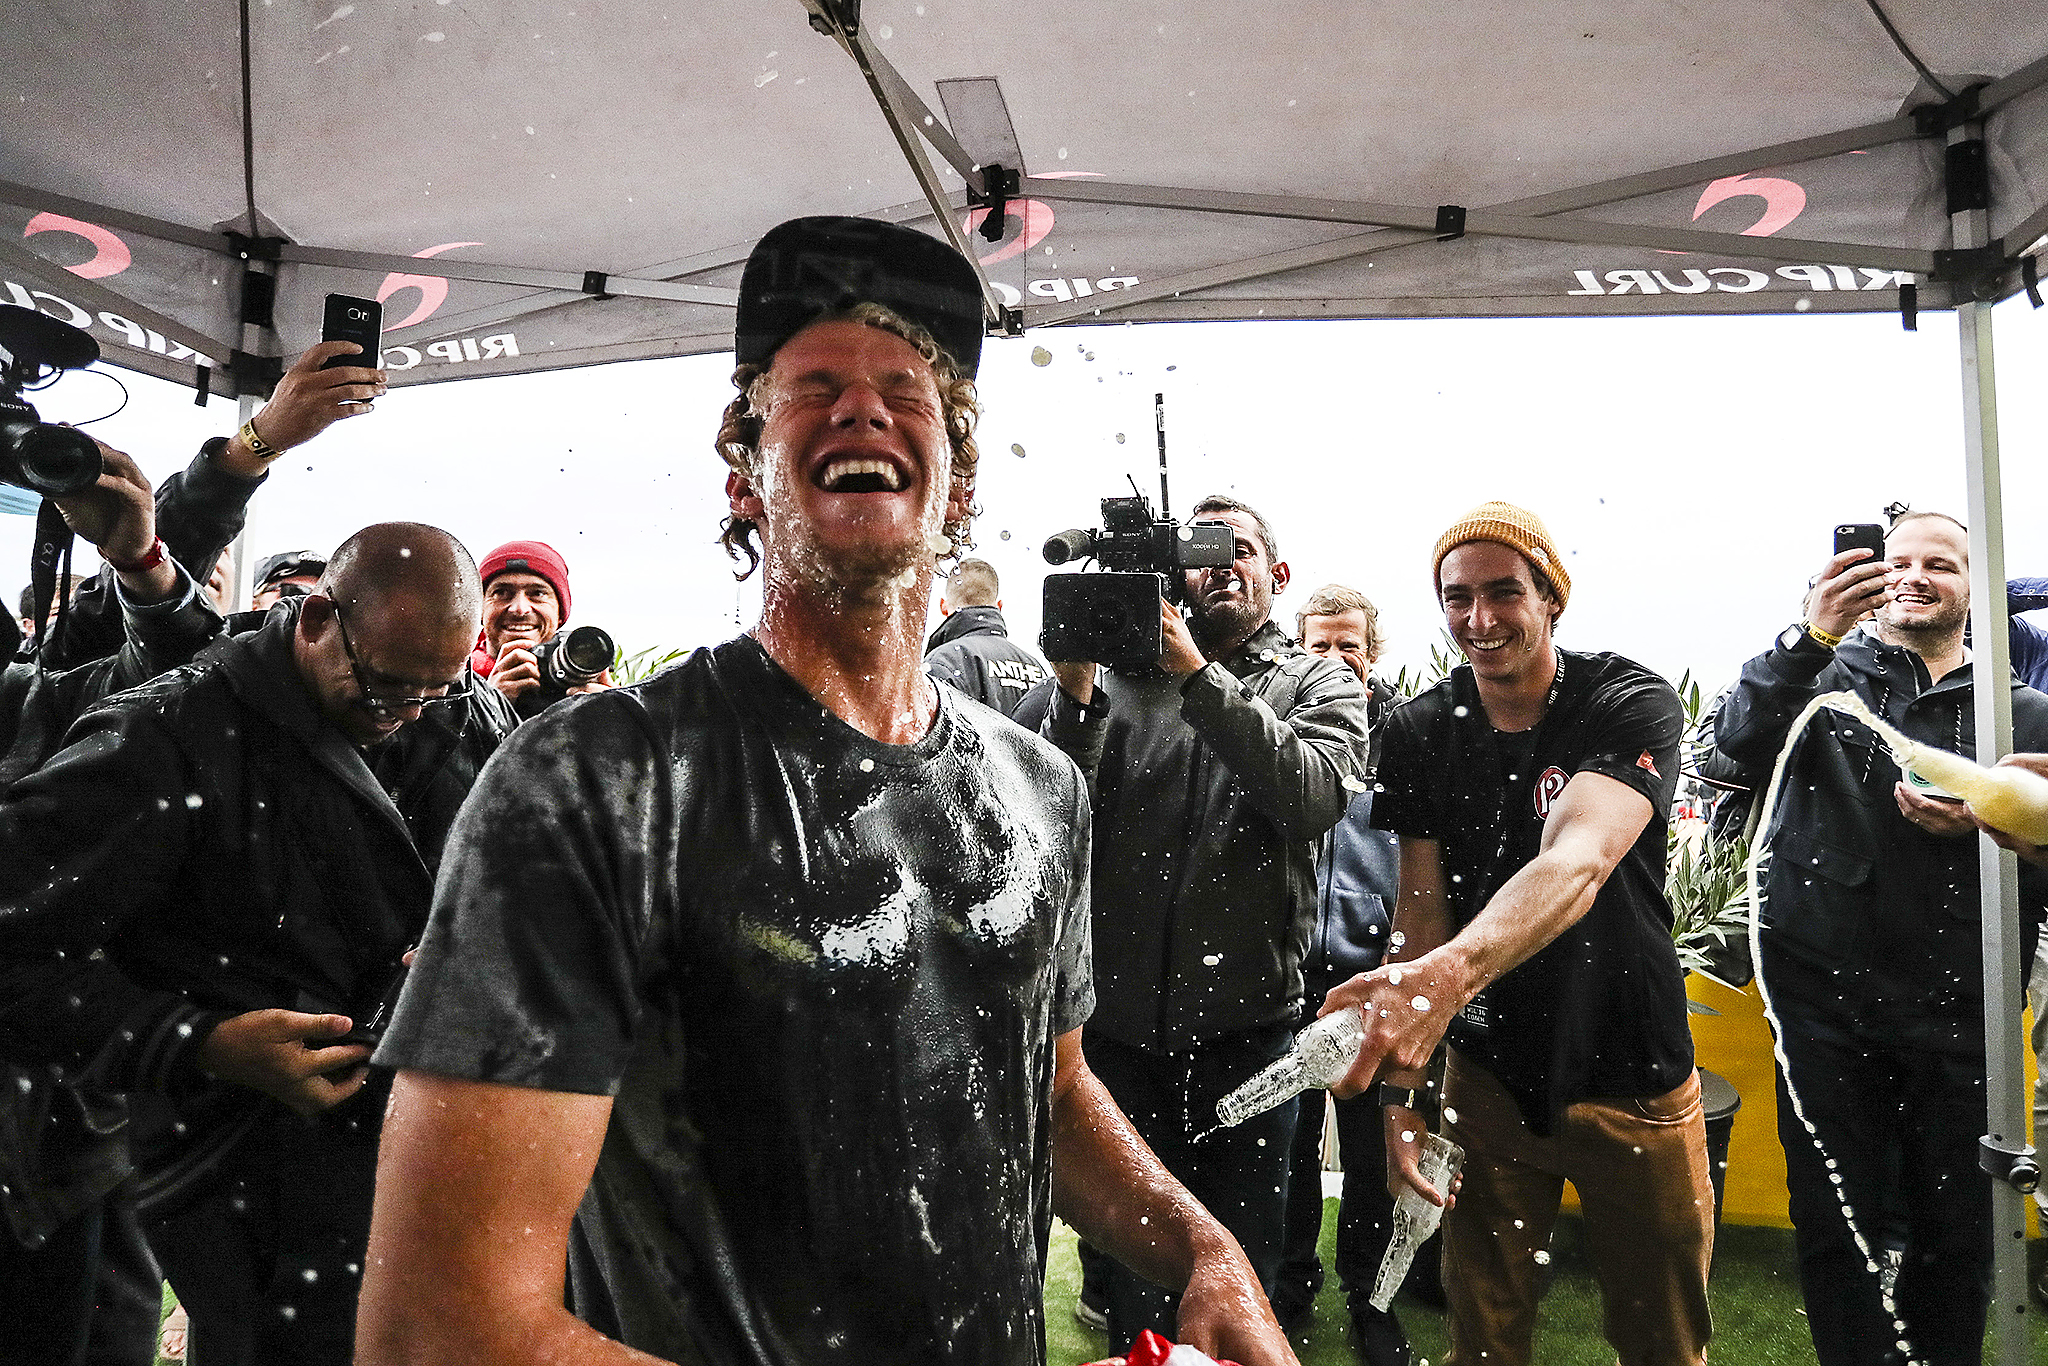 John John Florence celebrating his World Title Victory at the Meo Rip Curl Pro Portugal. Photo: WSL